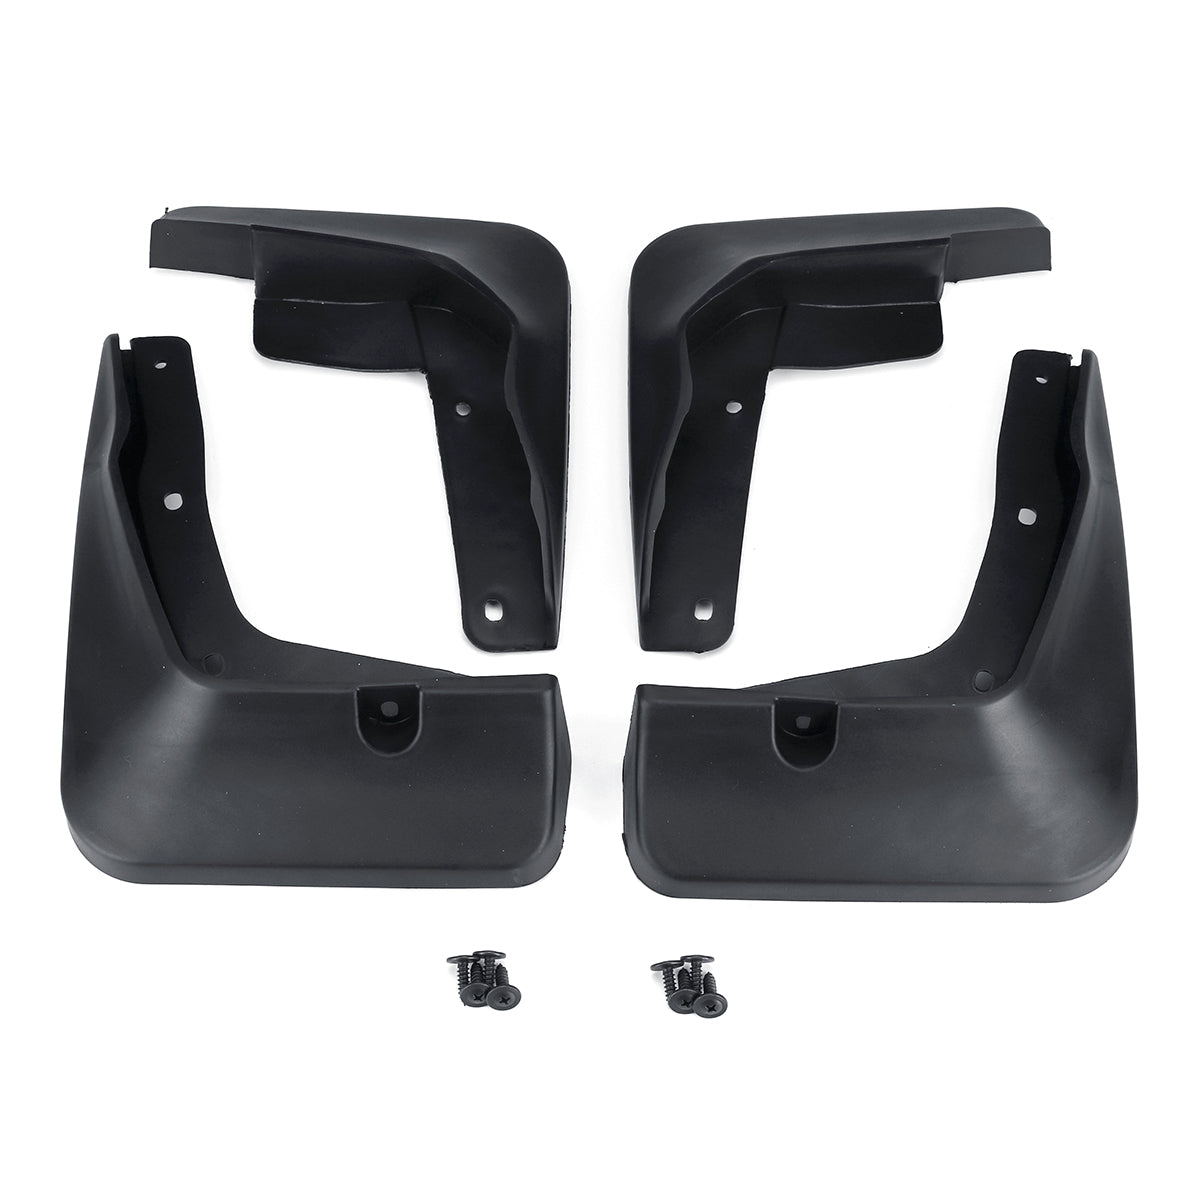 Oshotto Mud Flap (O.E.M Type) For Chevrolet Cruze 2015,2016,2017,2018,2019,2020 (T-II) (Set of 4)